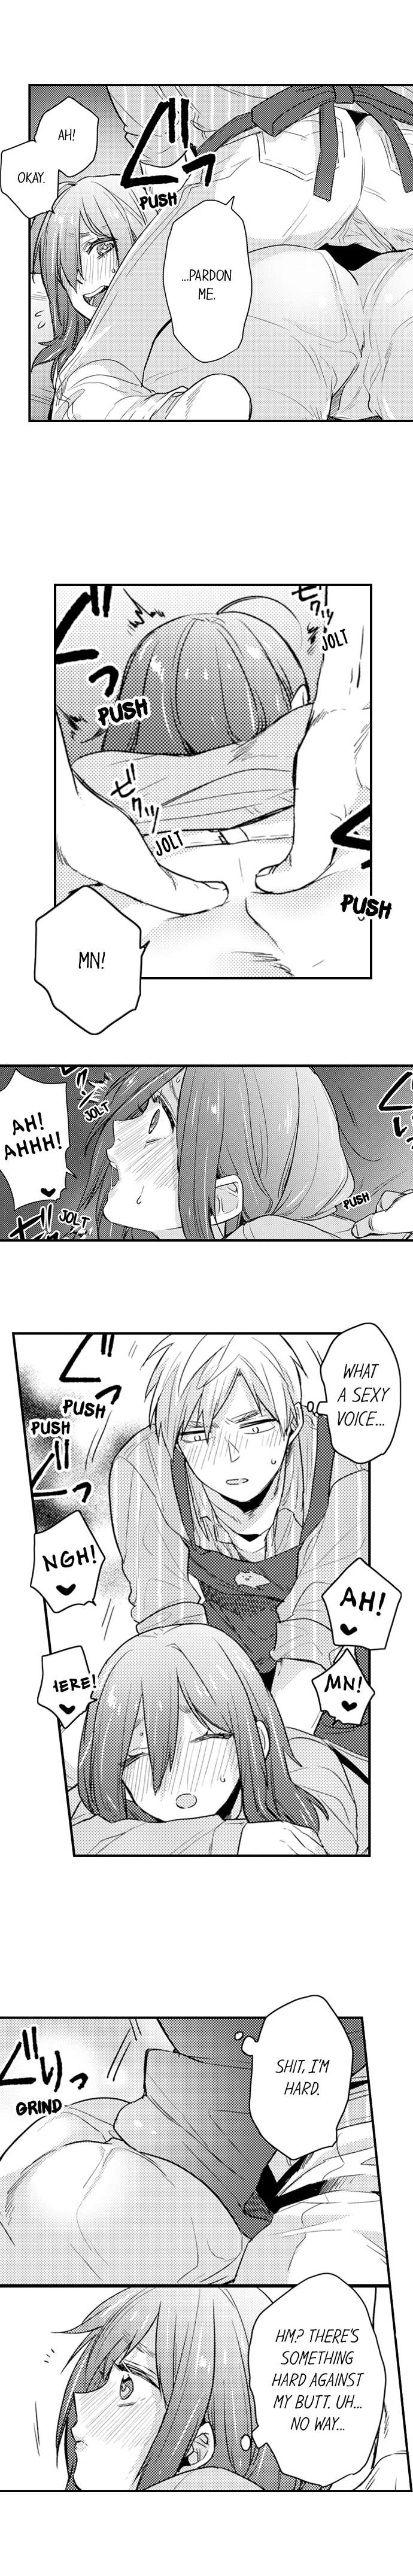 The Massage ♂♀ The Pleasure of Full Course Sex Chapter 4 - Page 5